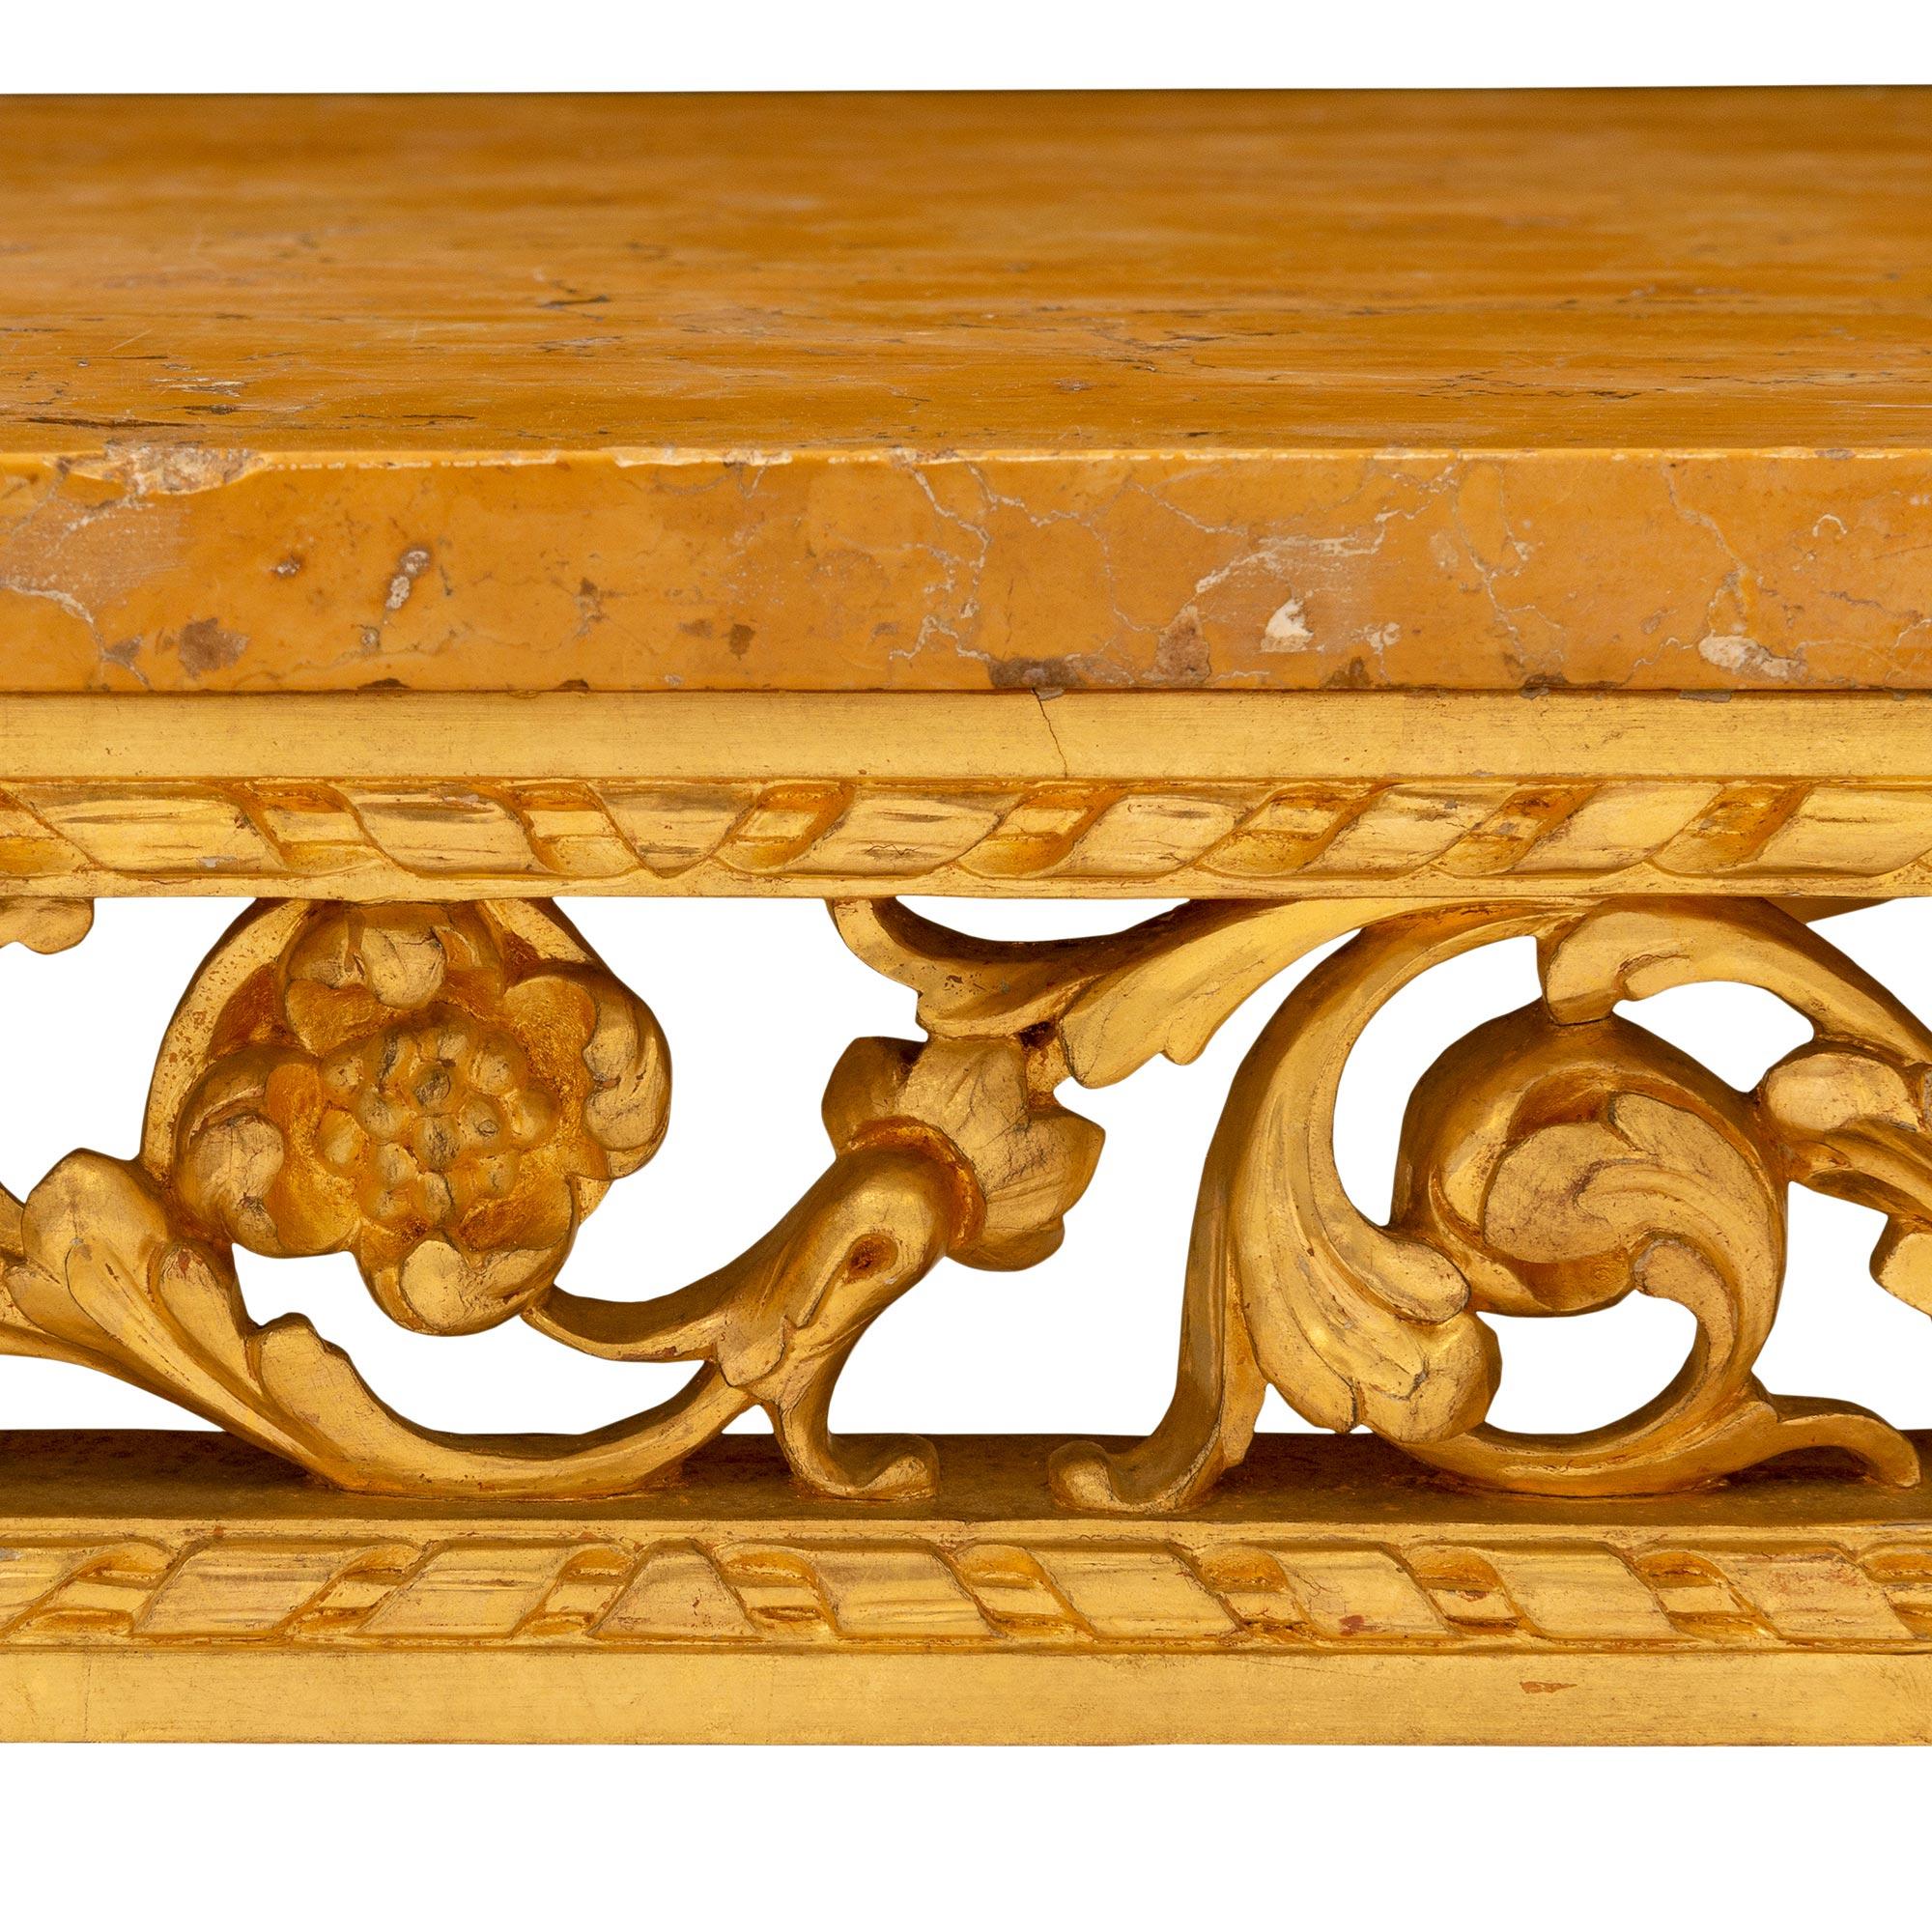 Italian 19th Century Giltwood and Giallo Reale Marble Center Table For Sale 4